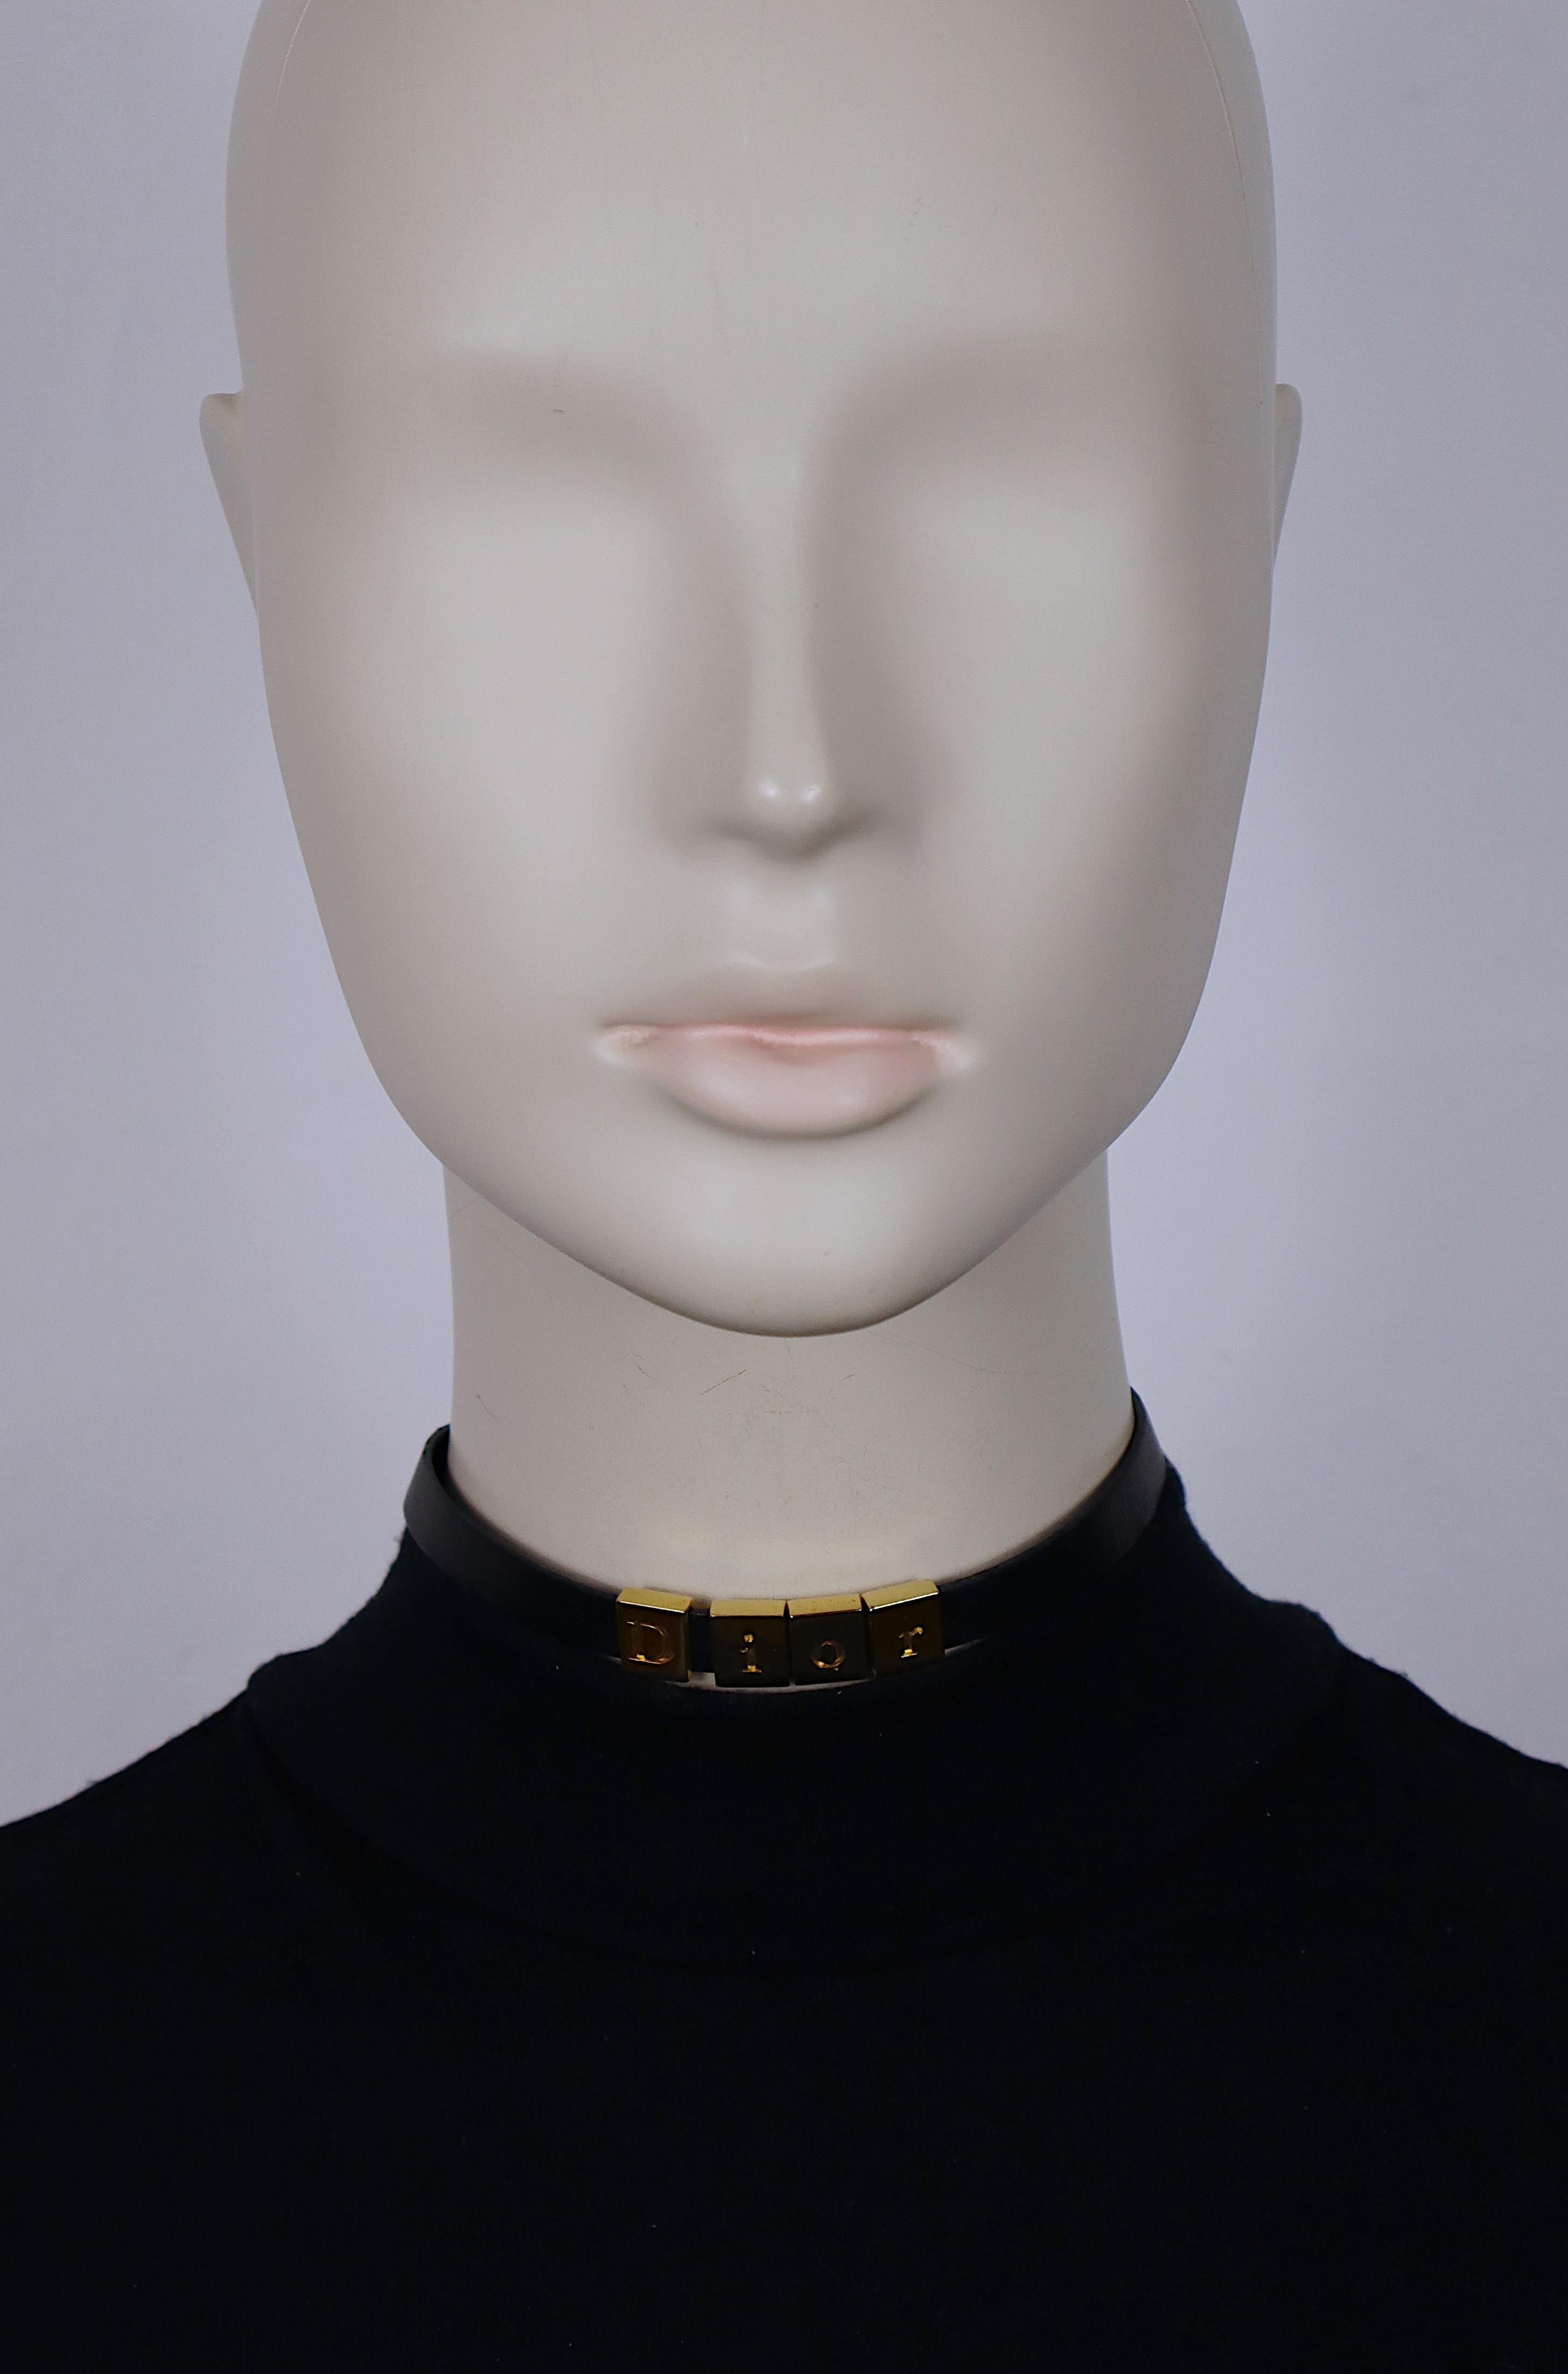 CHRISTIAN DIOR black leather choker necklace featuring four movable gold tone rectangles embossed D I O R.

Lobster clasp closure.
Adjustable length.

Embossed DIOR on the CD hanging tag.

Indicative measurements : adjustable length from approx. 30